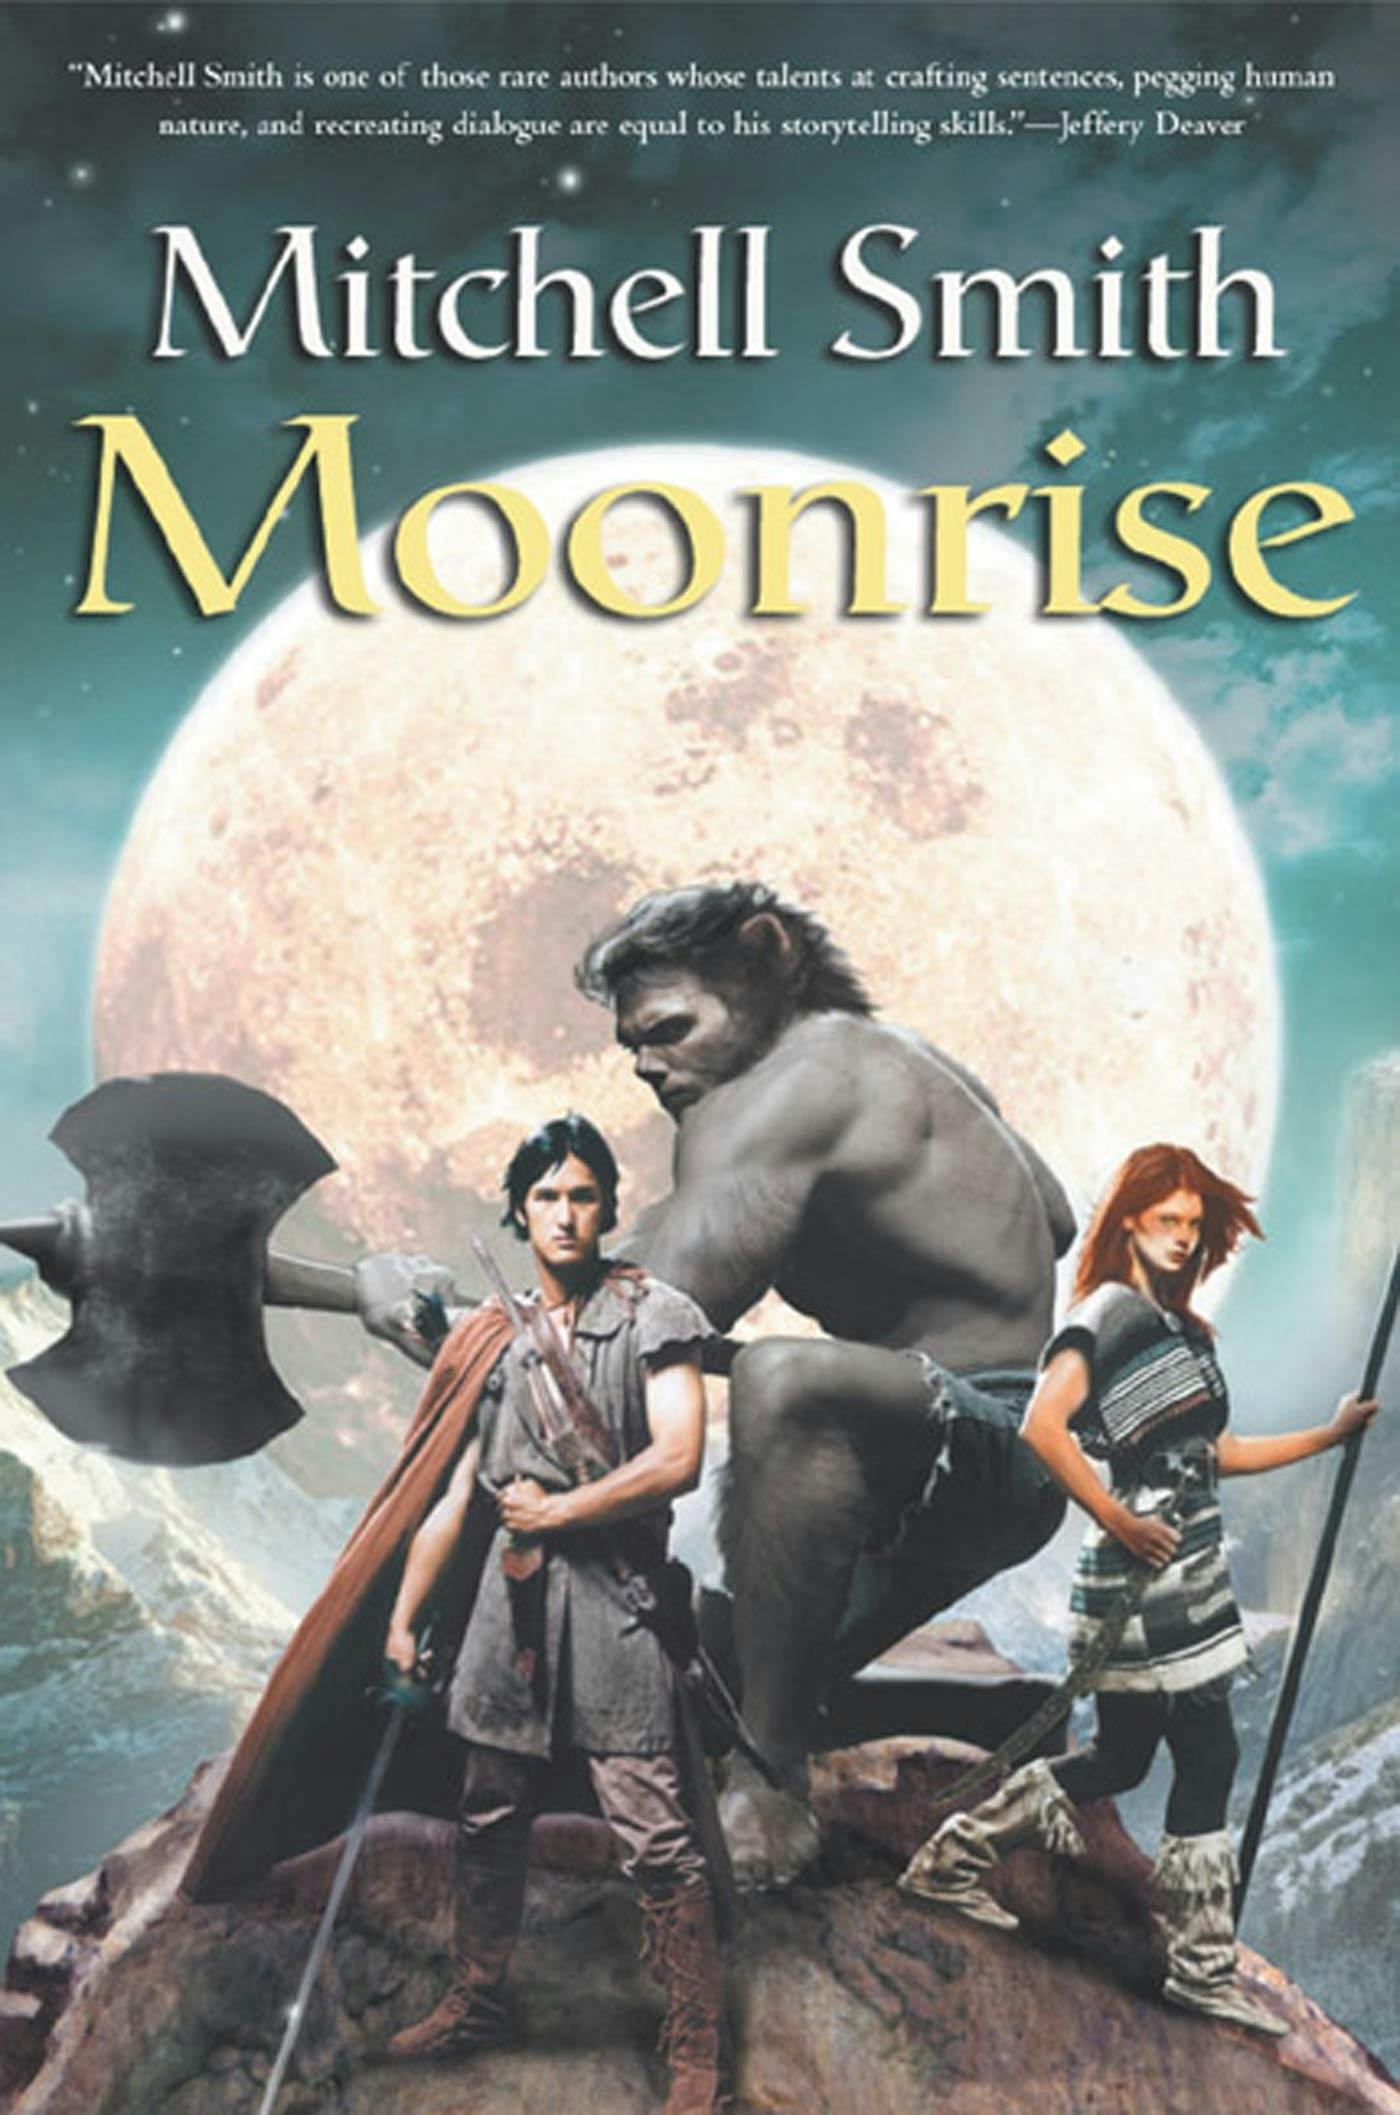 Cover for the book titled as: Moonrise